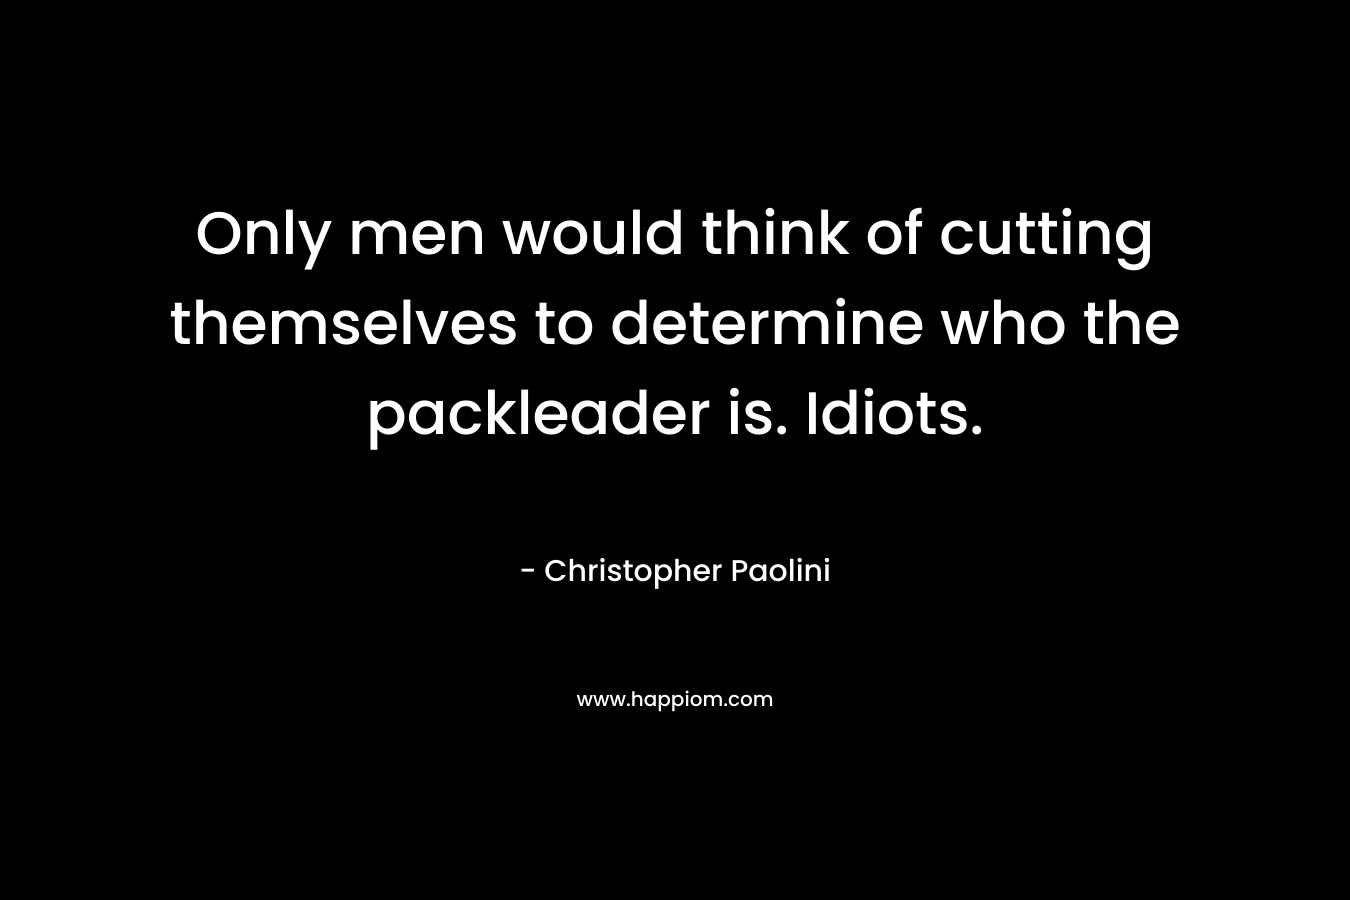 Only men would think of cutting themselves to determine who the packleader is. Idiots. – Christopher Paolini